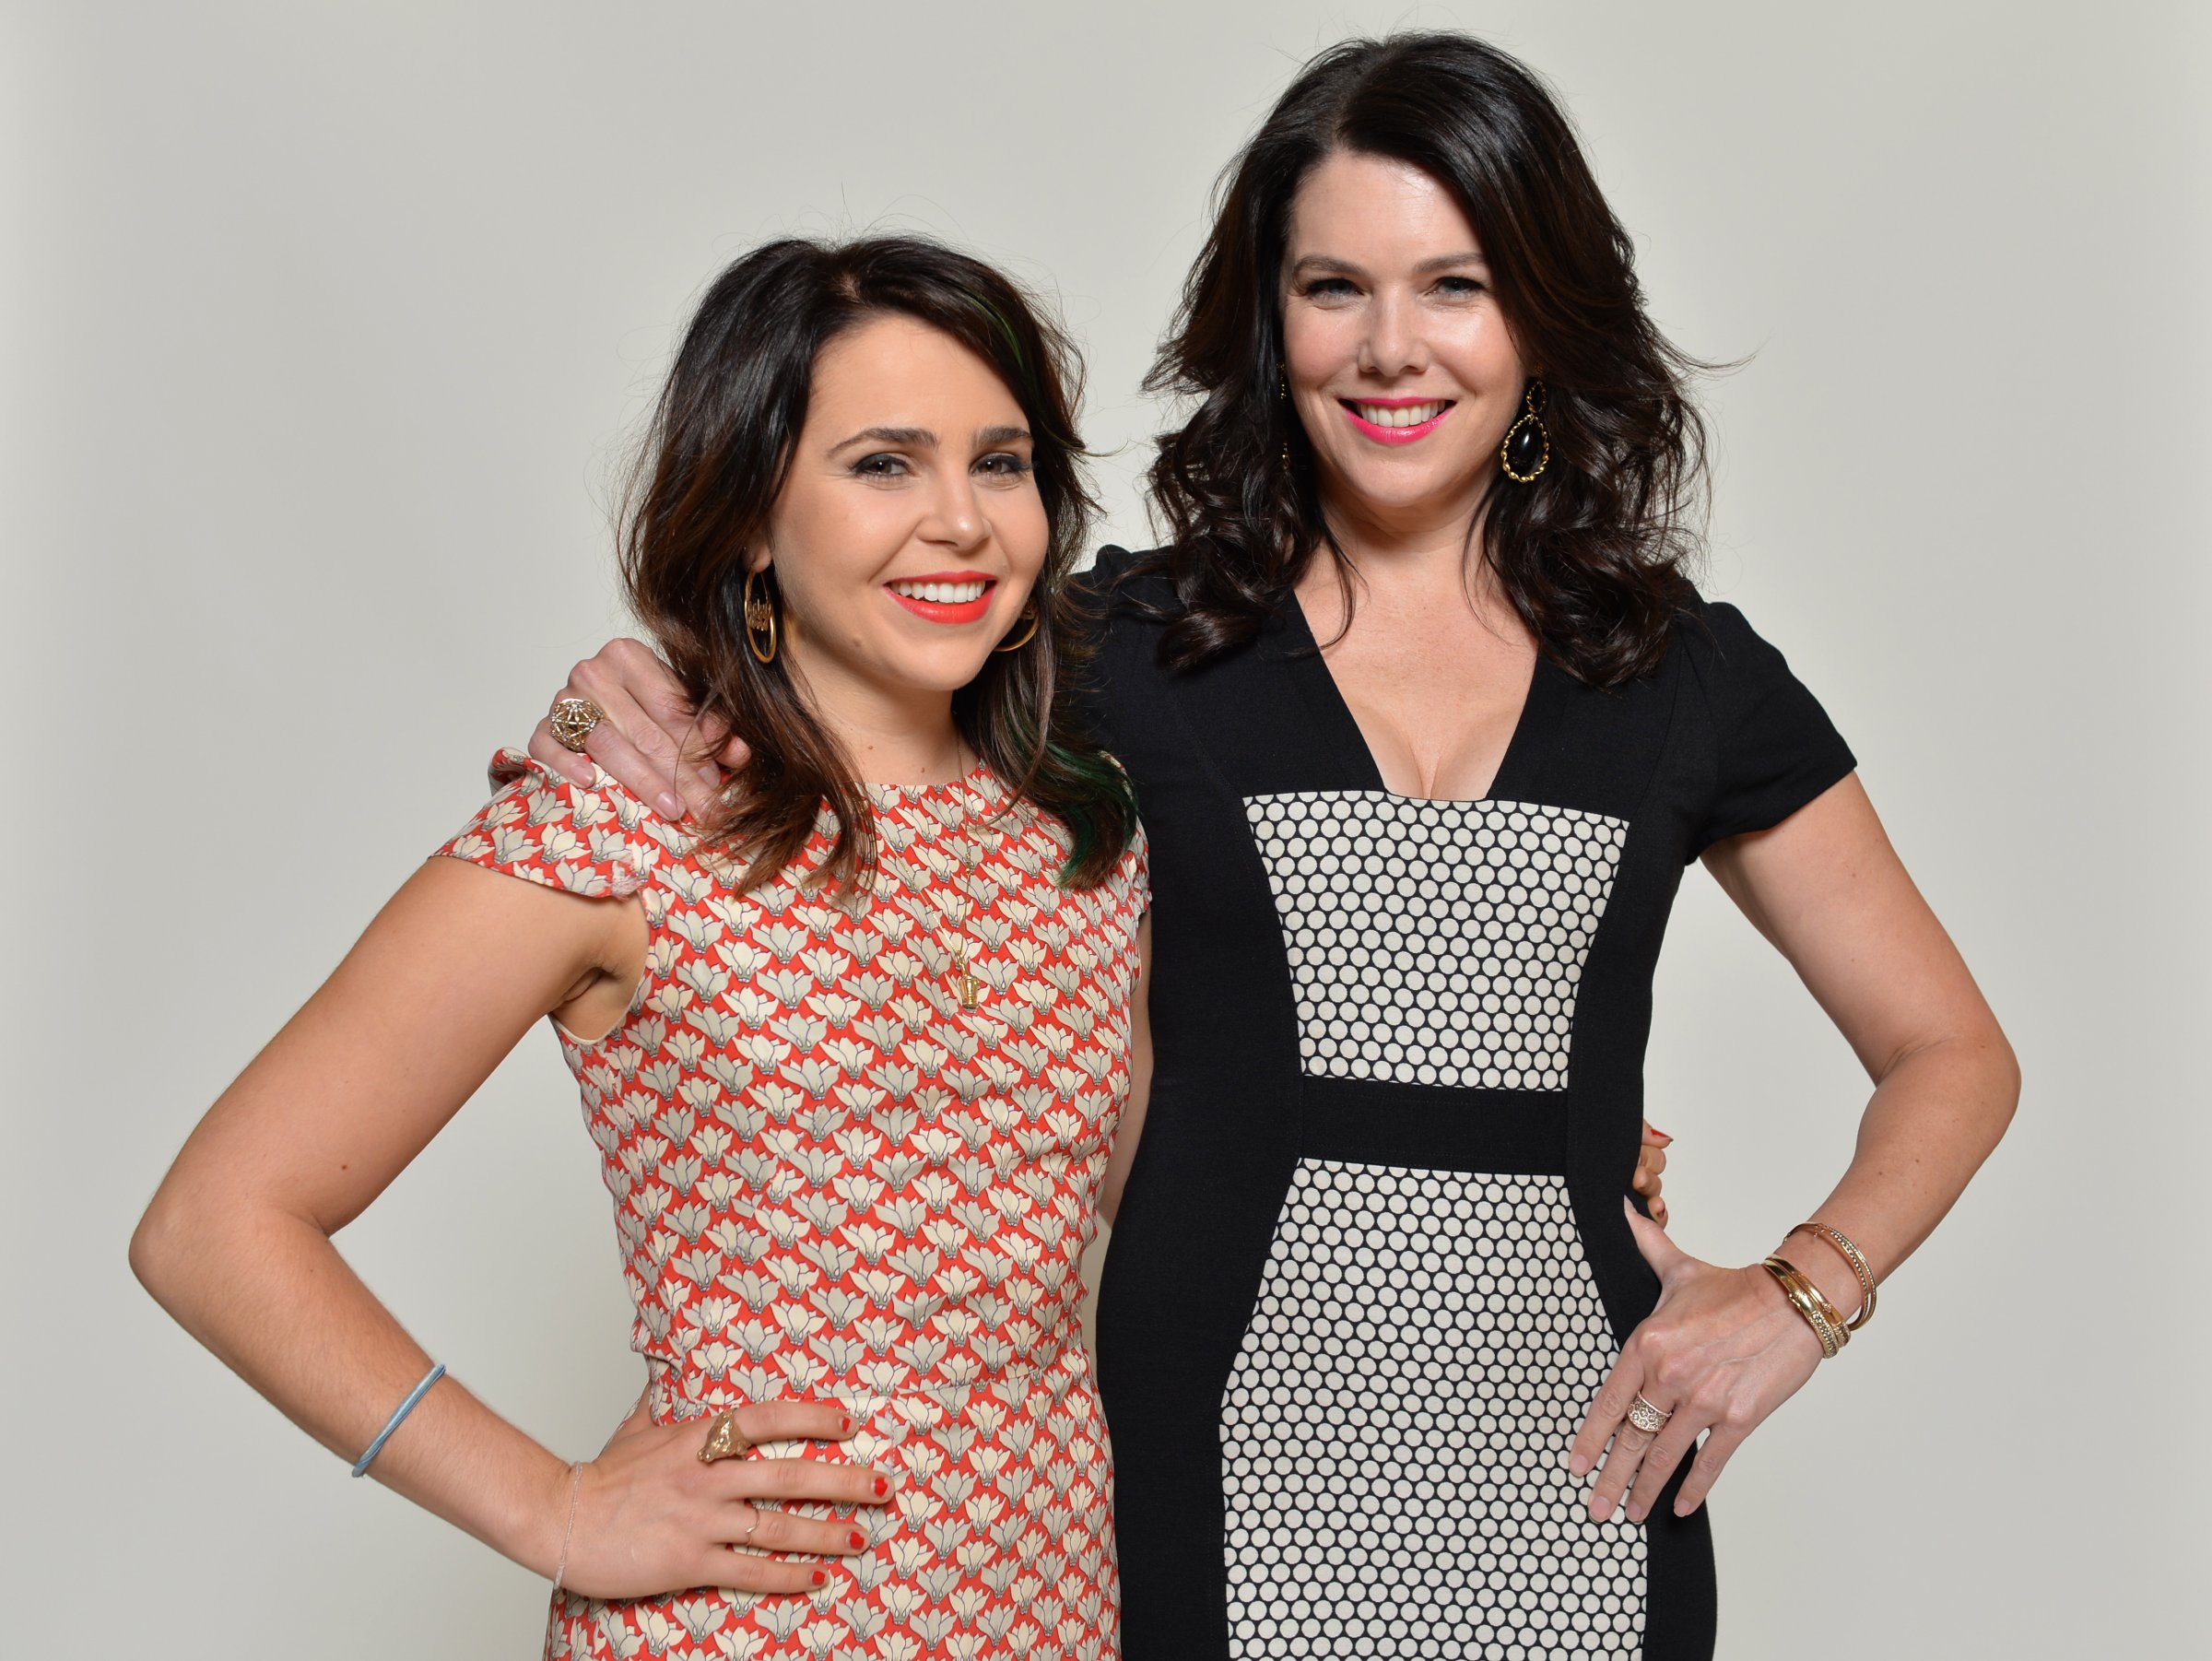 Mae Whitman and Lauren Graham pose for a portrait during NBC 2013 Summer Press Tour at The Beverly Hilton Hotel on July 27, 2013 in Beverly Hills, California.